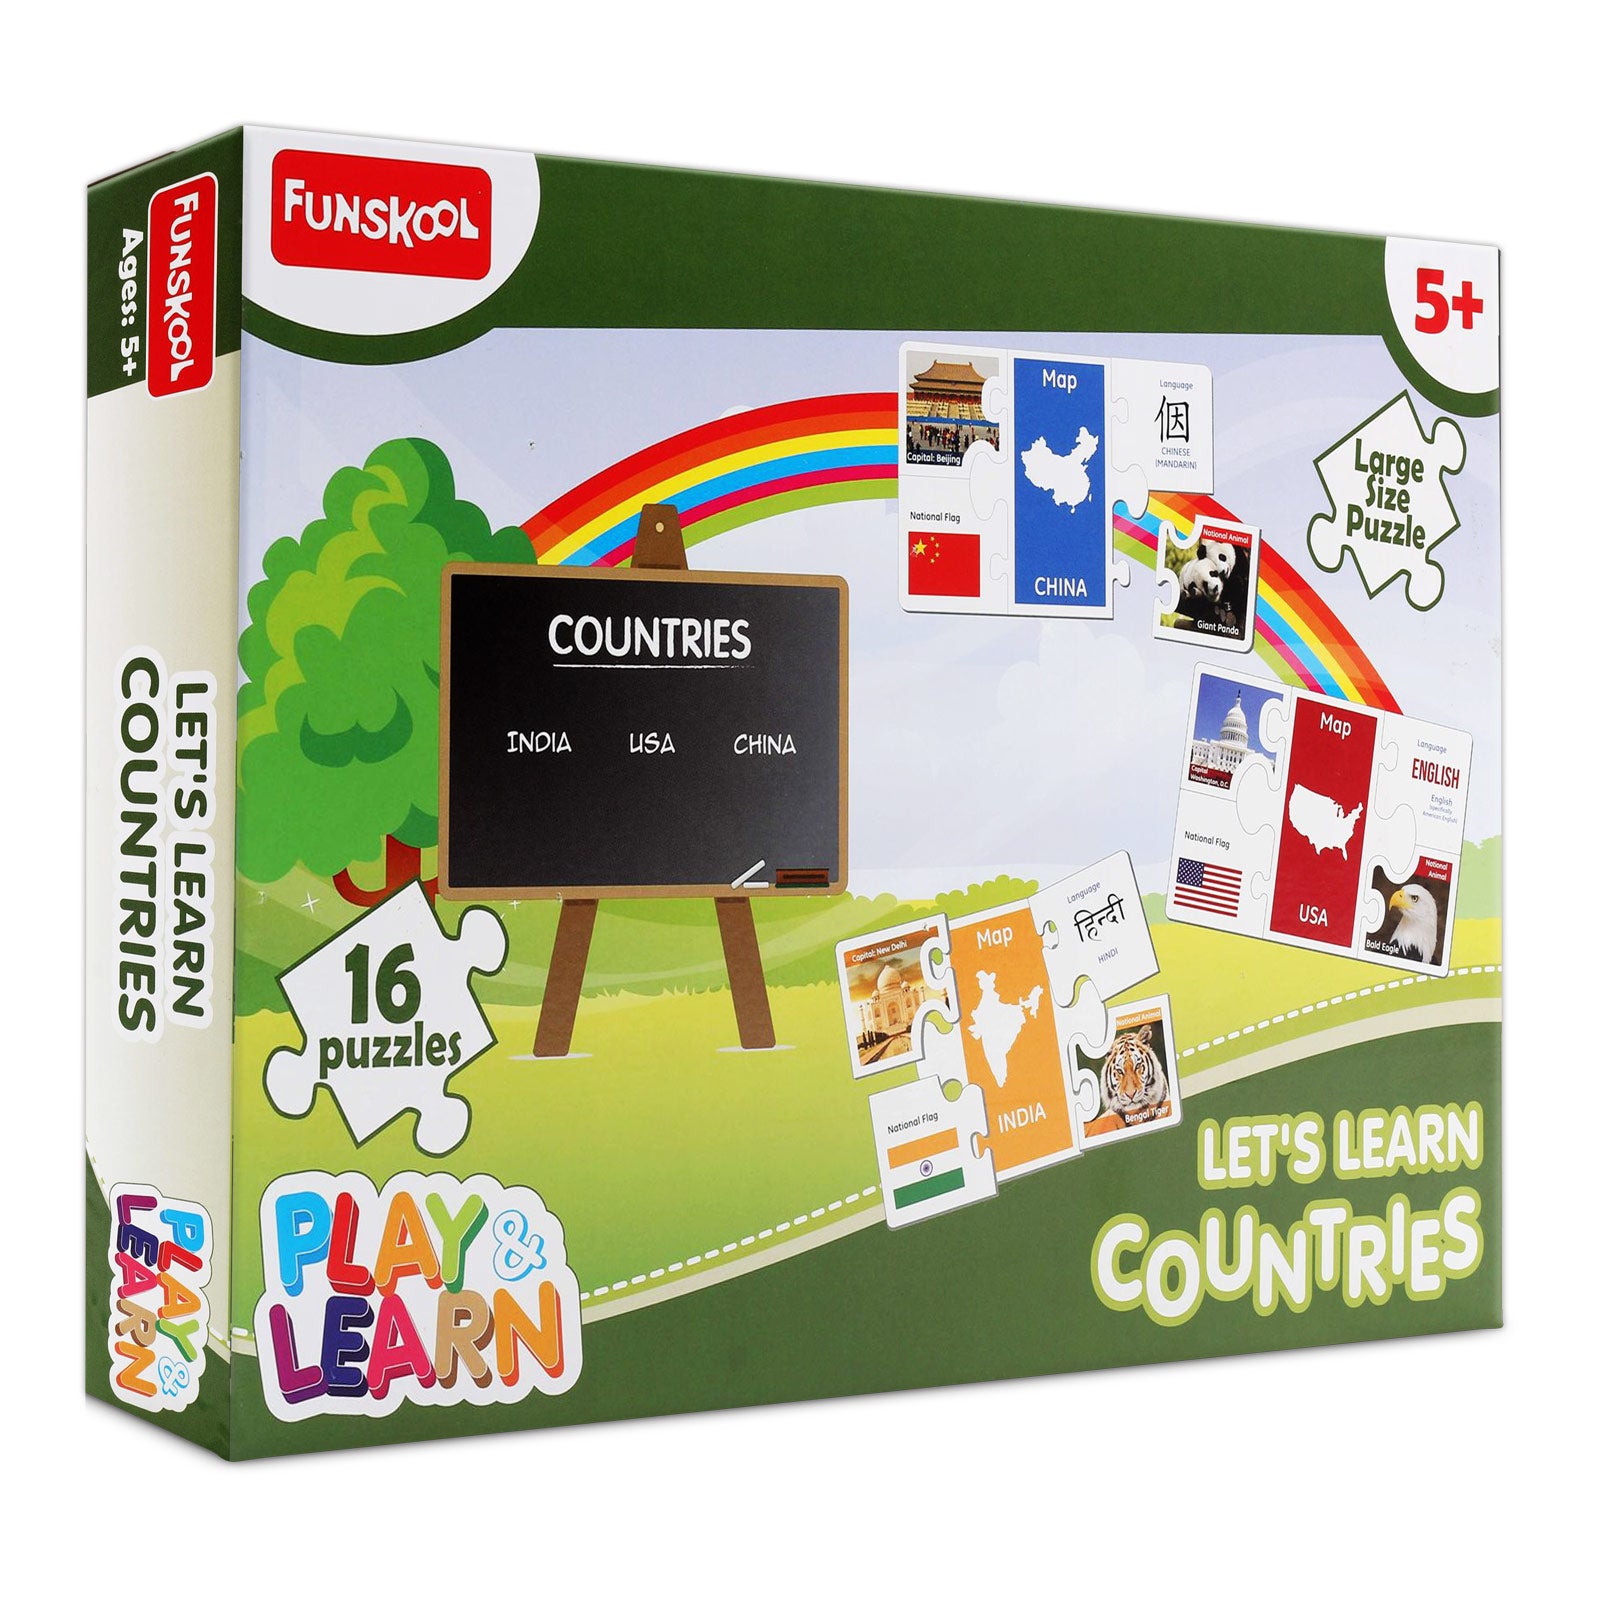 Funskool countries 16 puzzles